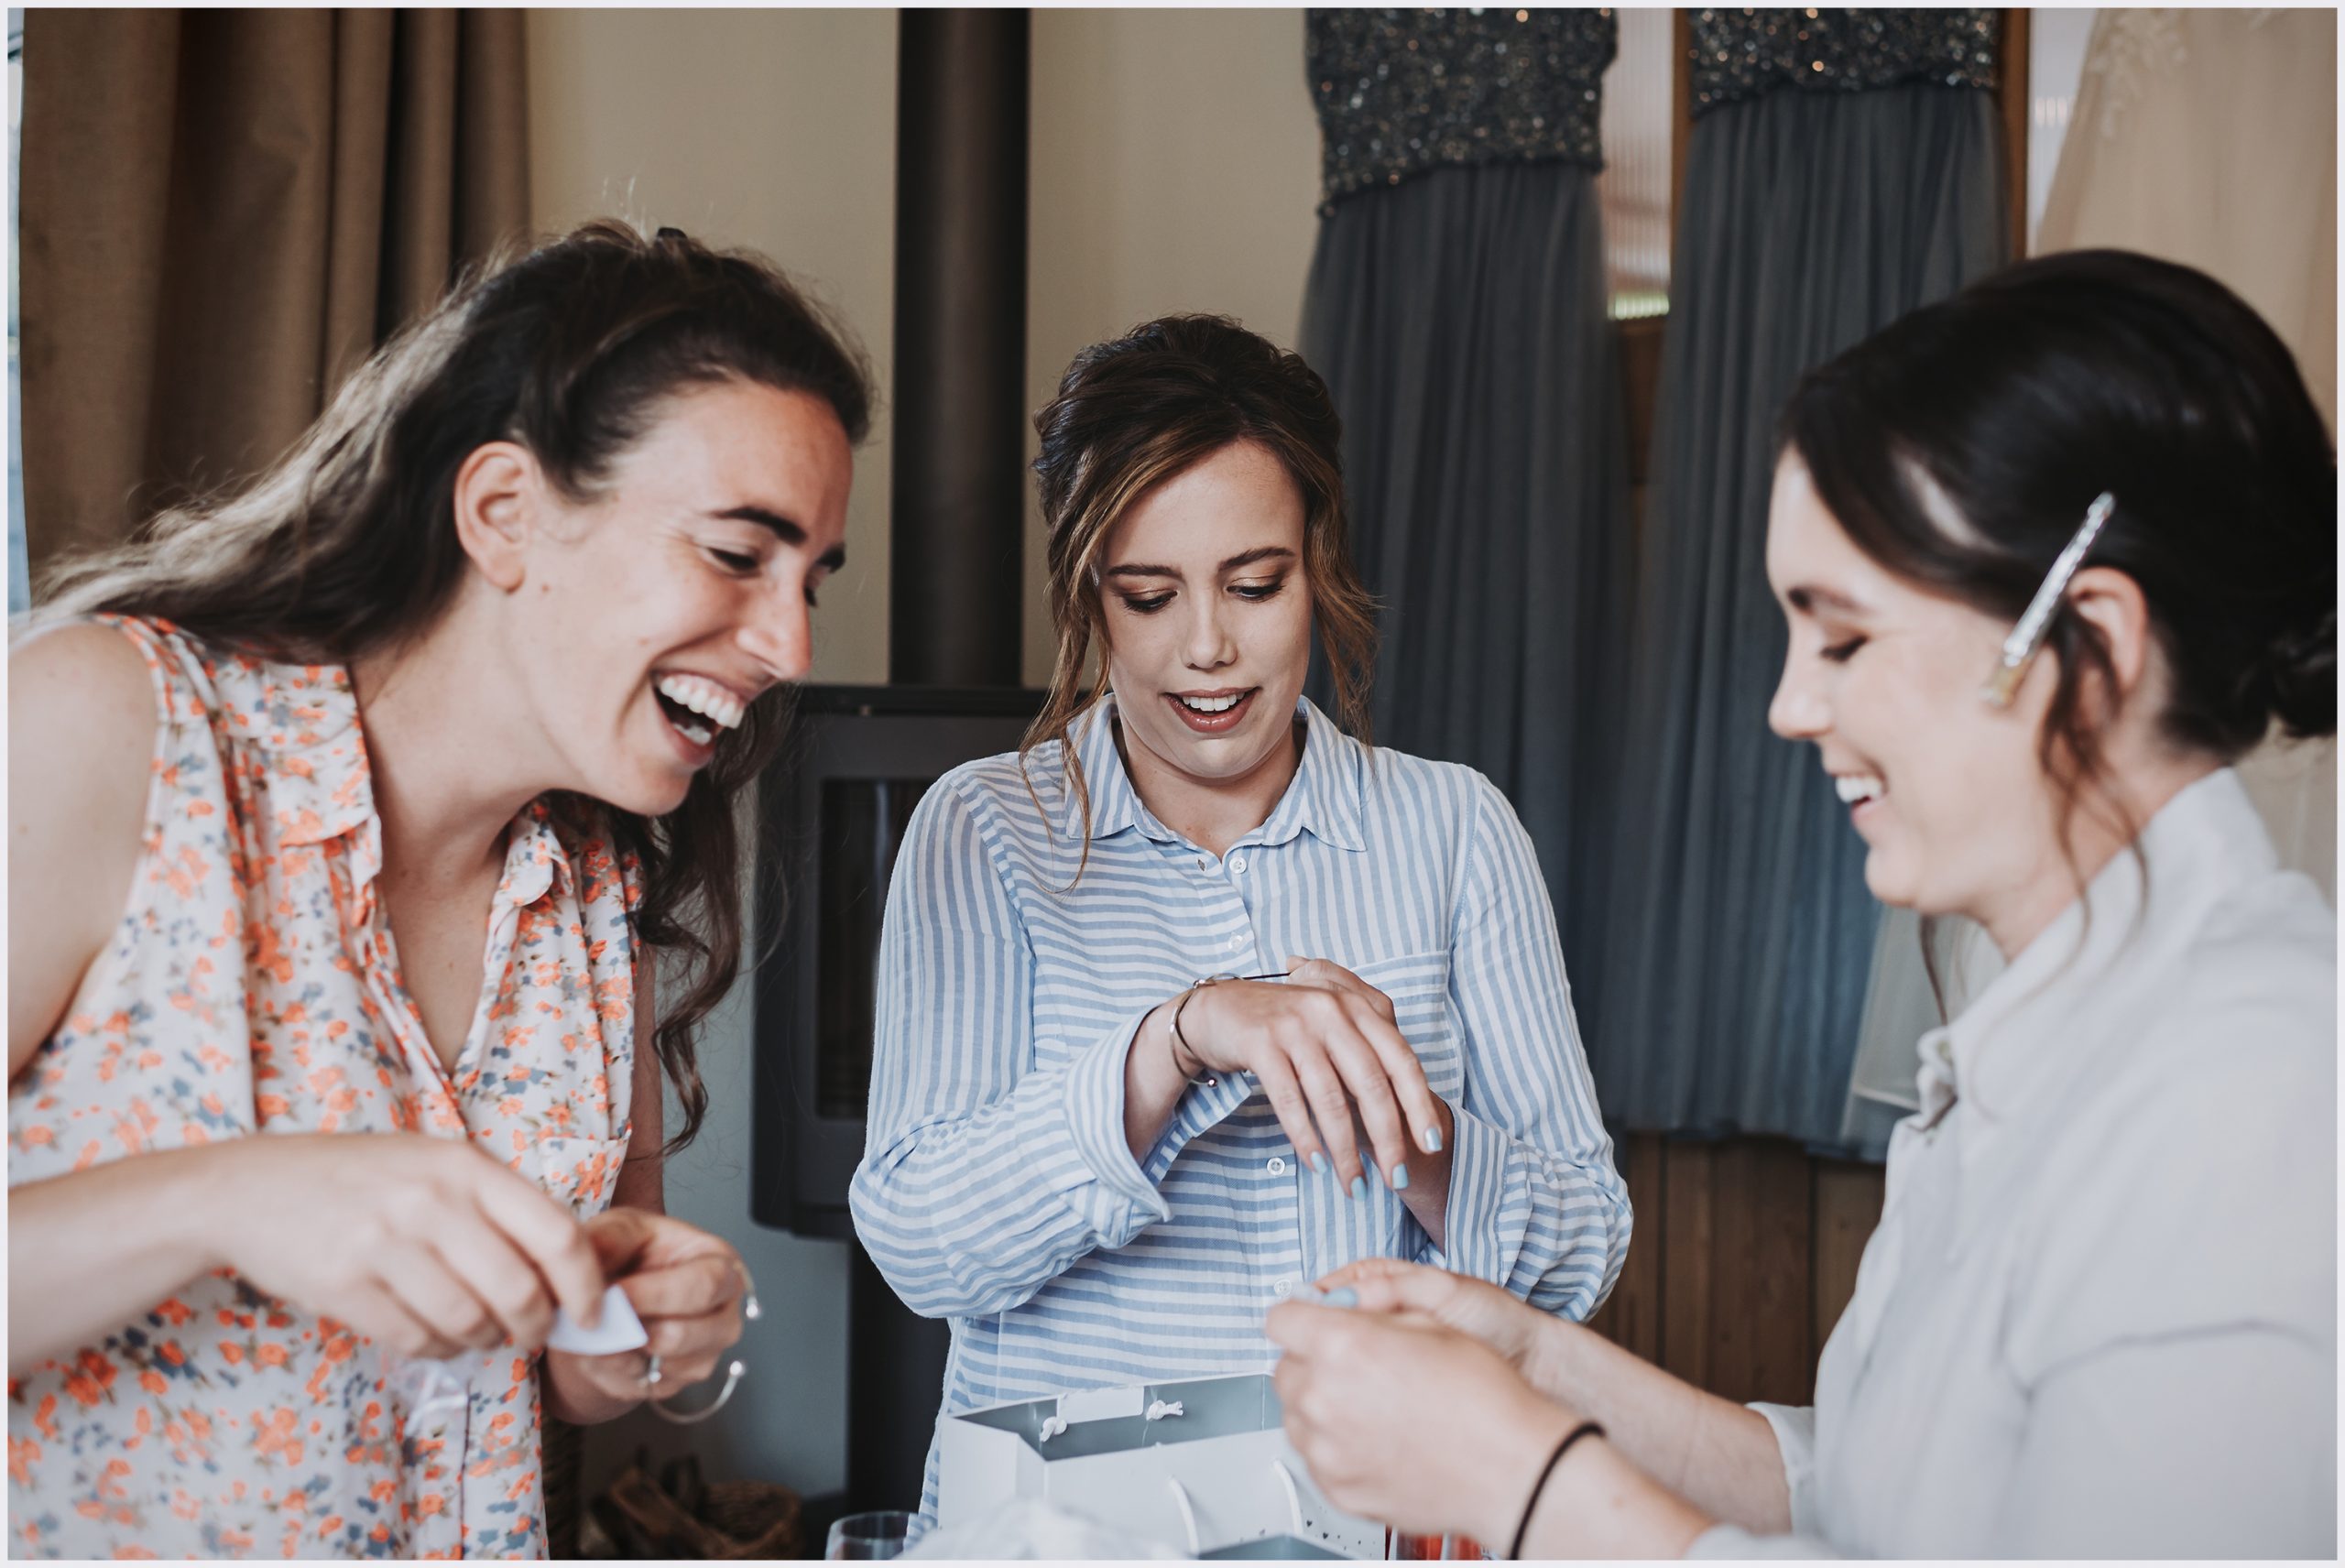 Three smiling bridesmaids opening gifts from the bride during the wedding morning.  Image captured by north Wales based wedding photographer Helena Jayne Photography